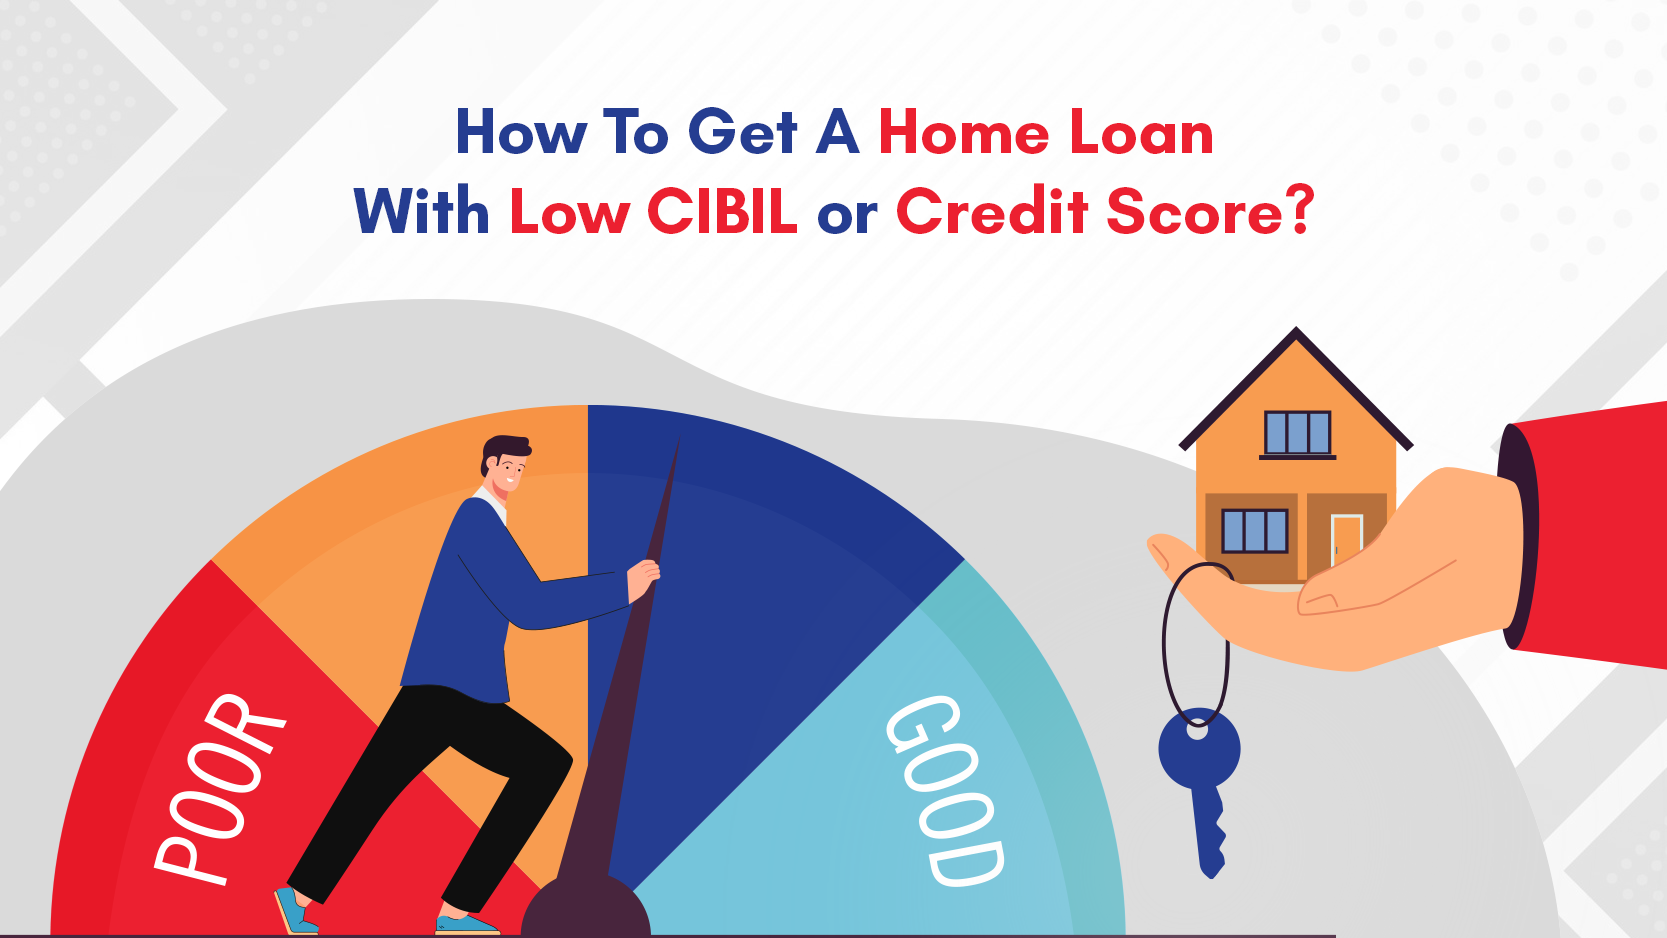 How To Get A Home Loan With Low CIBIL or Credit Score